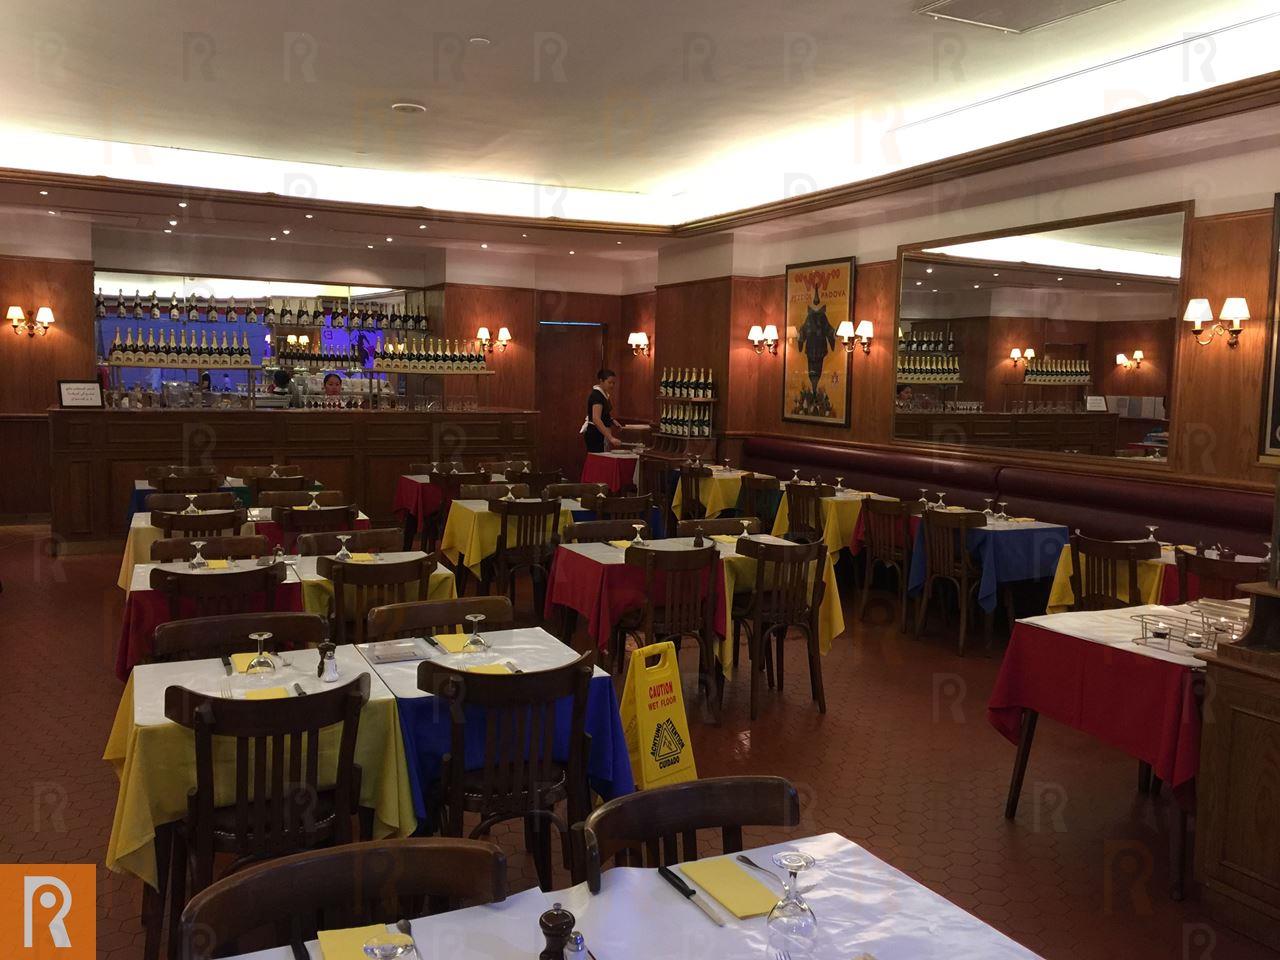 Our Experience at Entrecote Restaurant in The Avenues